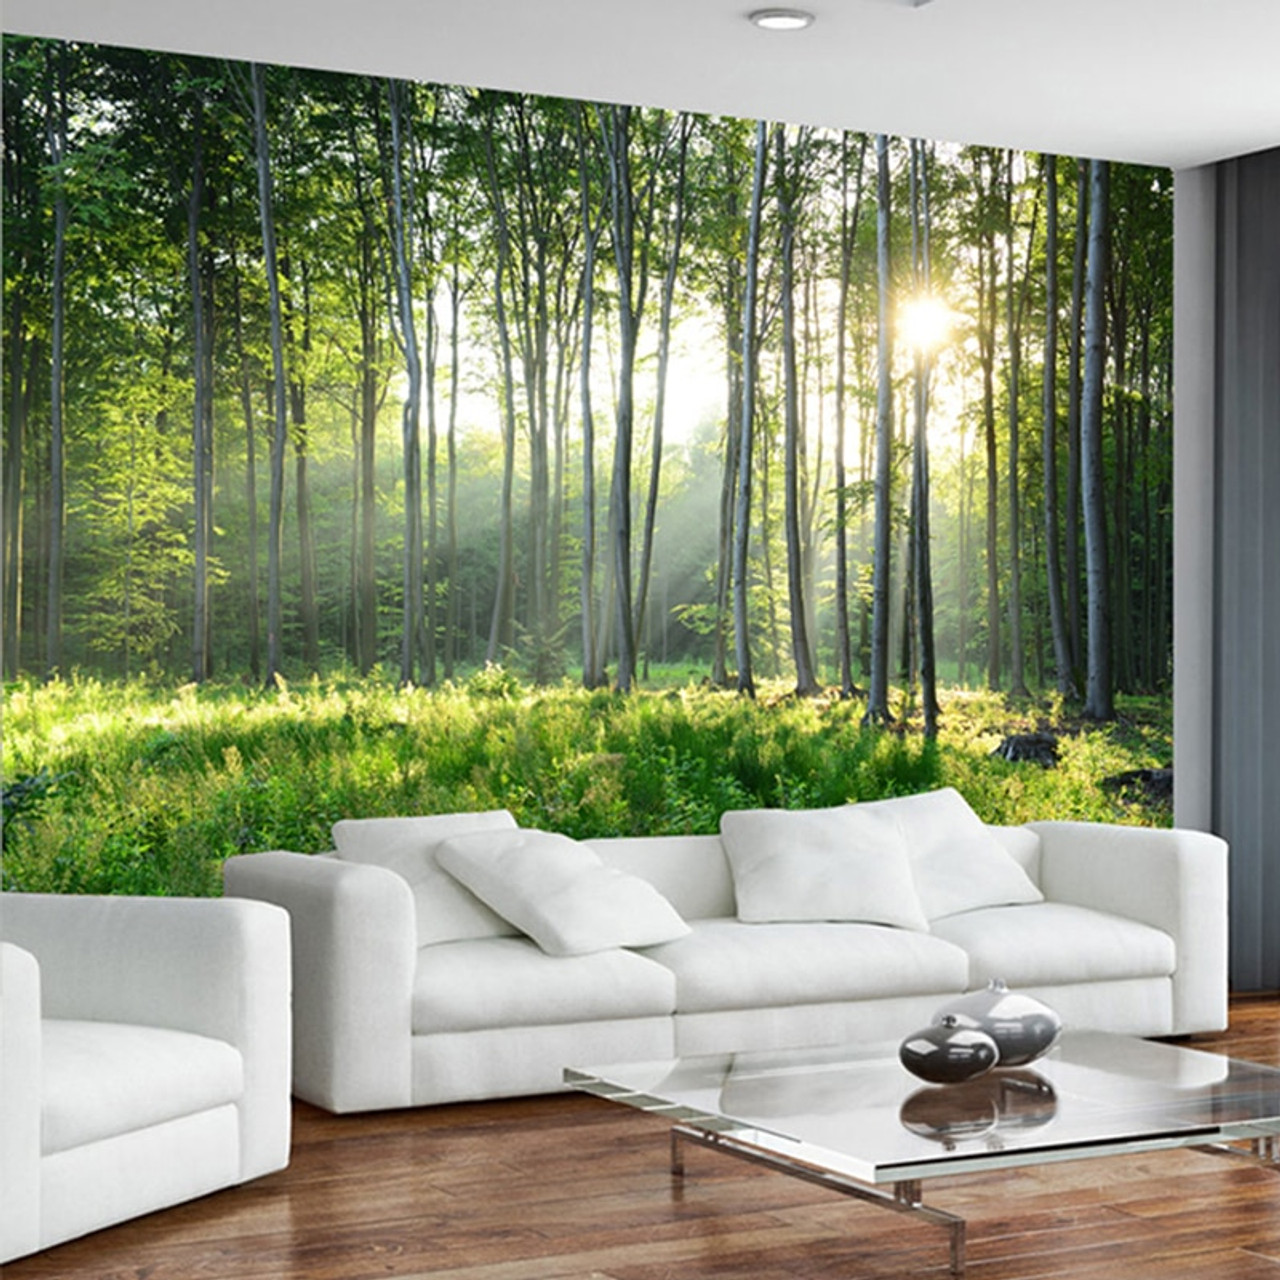 Nature Scenery Living Room Background Wall Sticker Self Adhesive Wallpaper  TV Landscape Bedroom Wall Sticker  China Wallpaper Murals Custom Mural  Wallpaper  MadeinChinacom